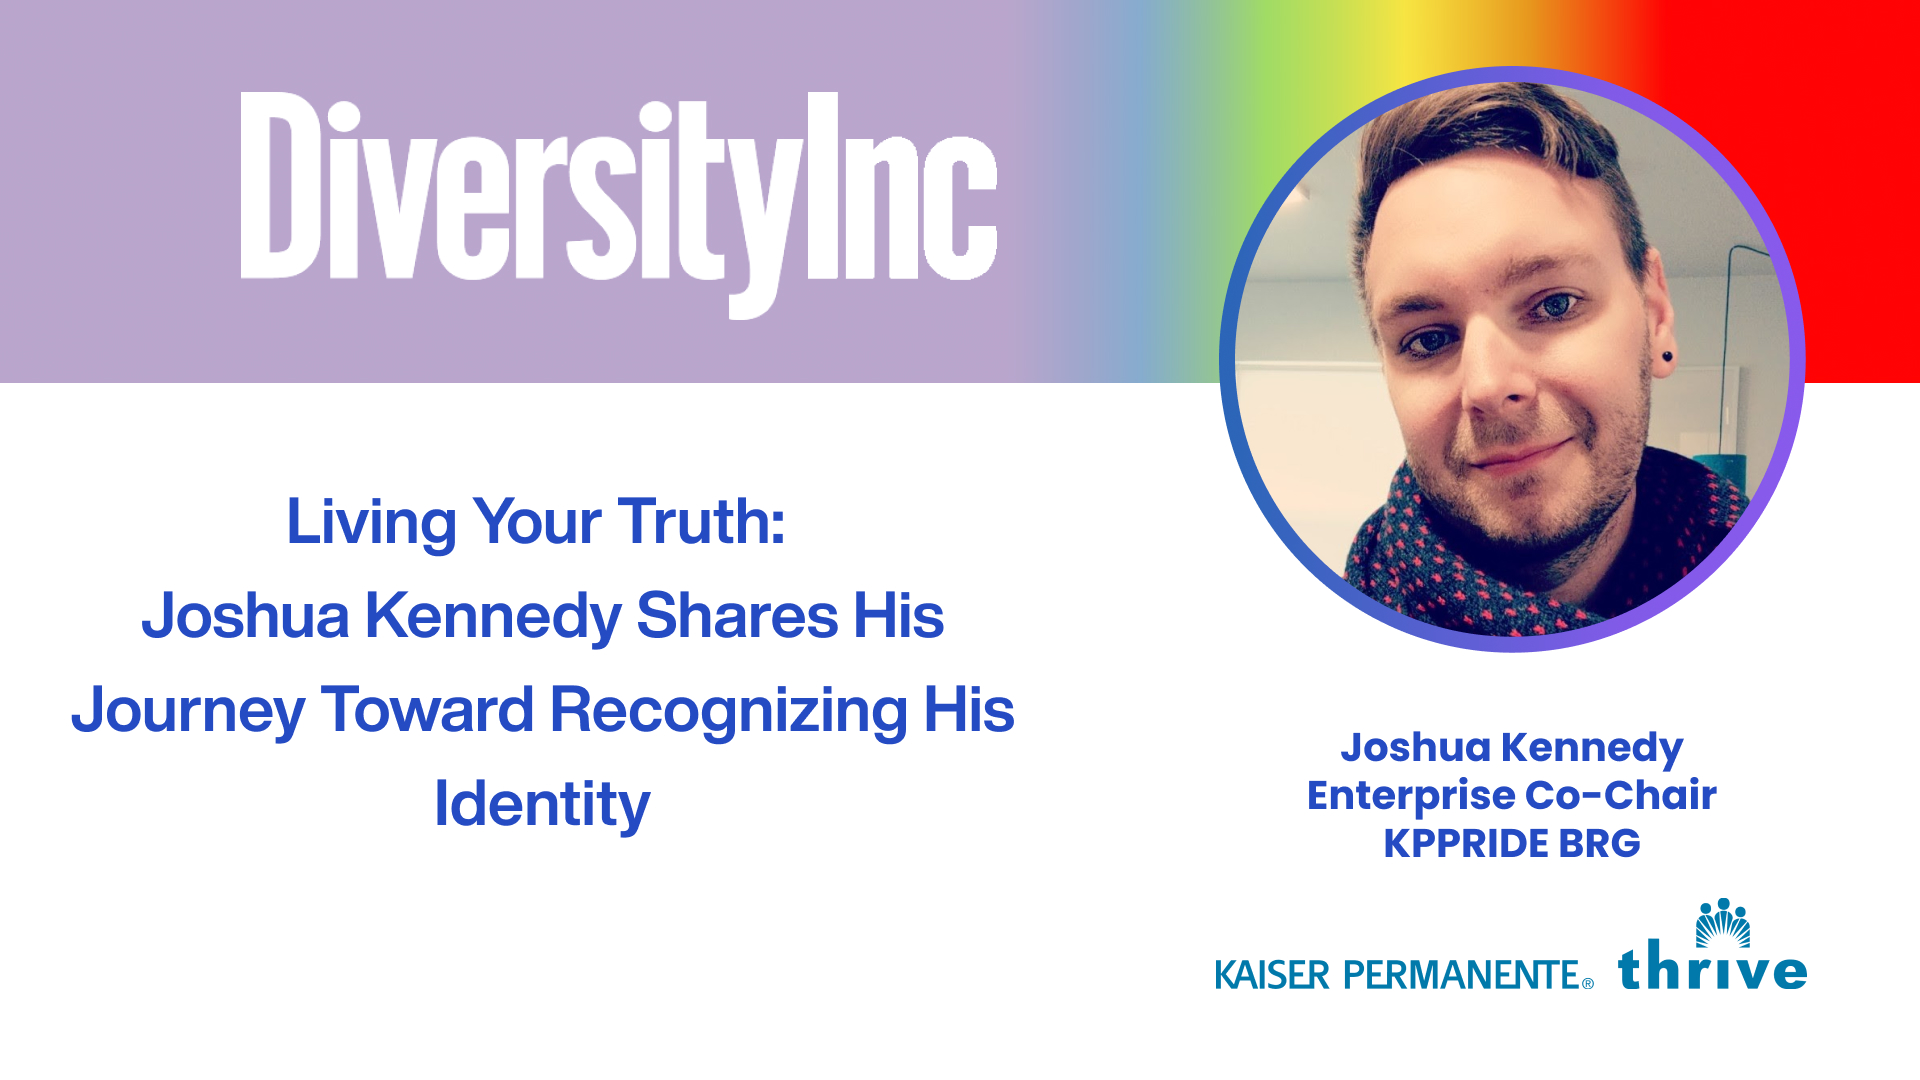 An interview with Joshua Kennedy from Kaiser Permanente